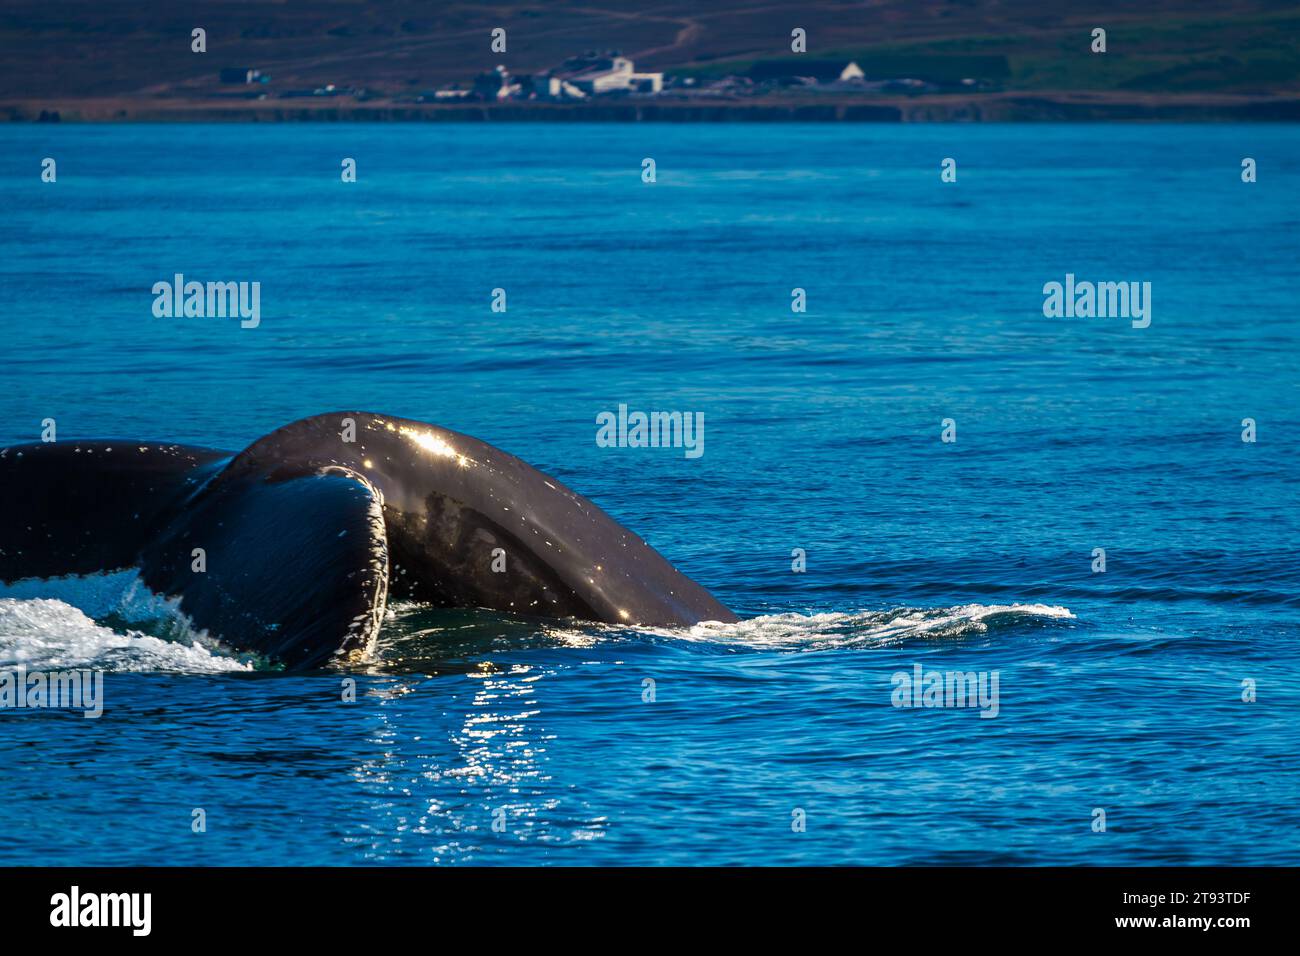 Close-up view of adult Hump Back Whale Tail Stock Photo